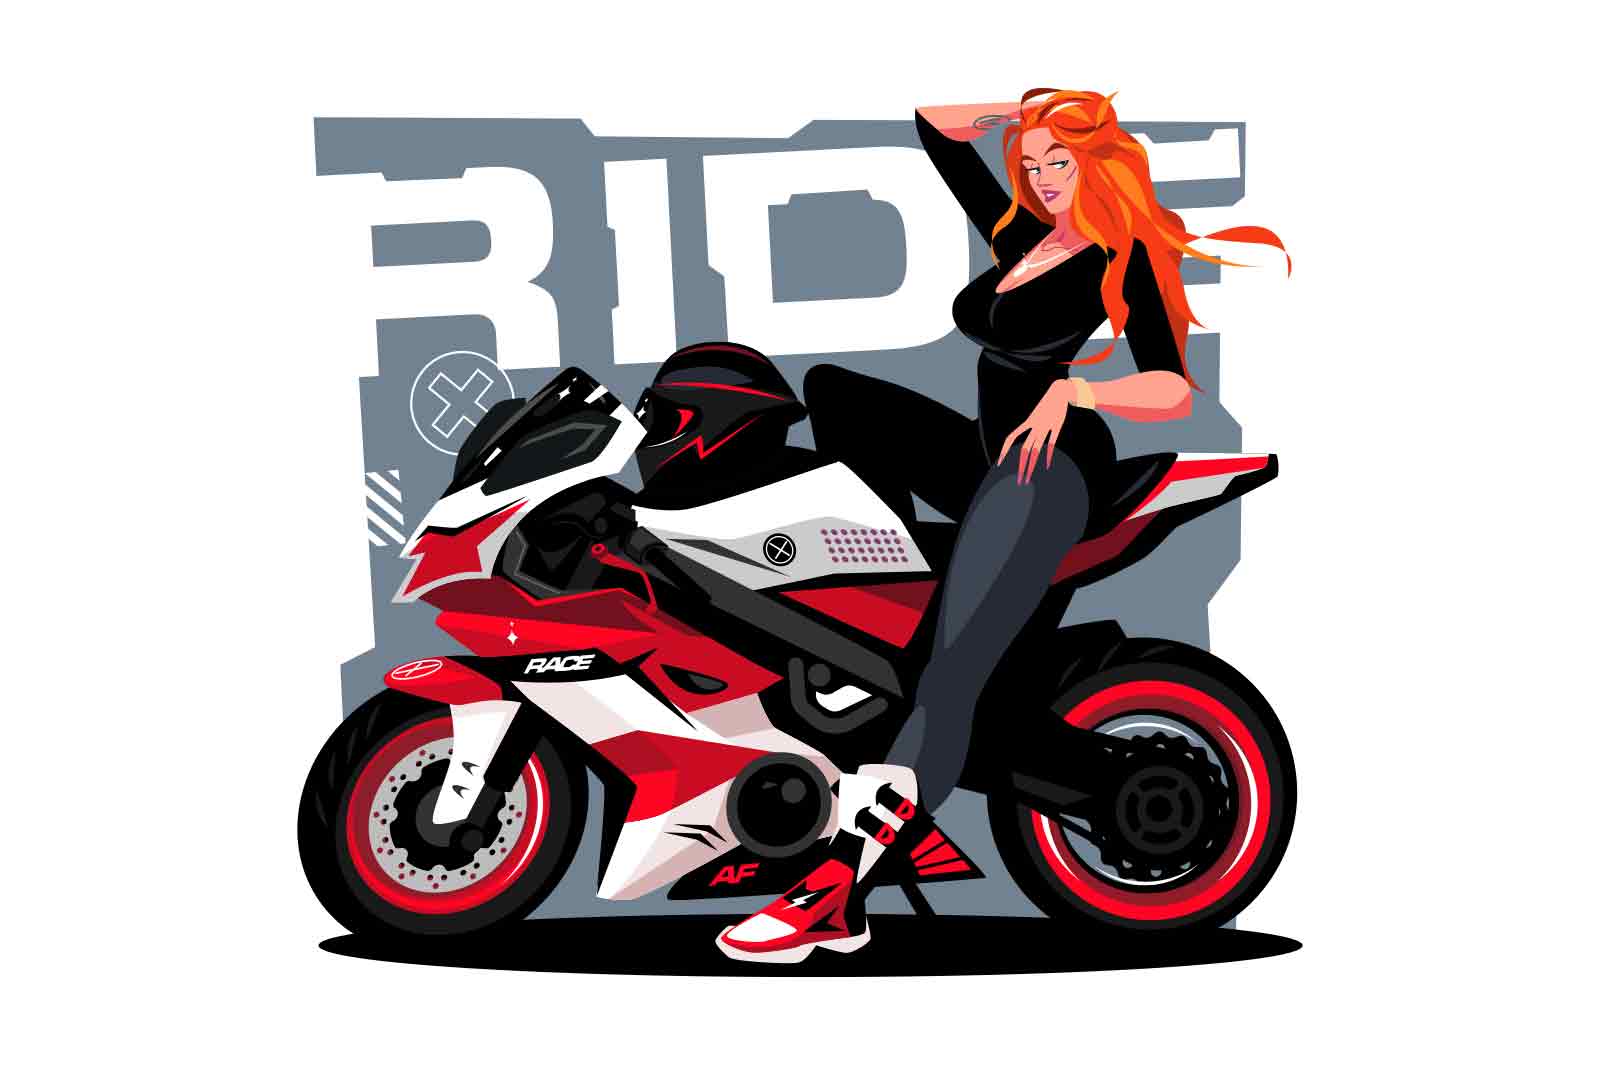 Woman sits on sport bike, vector illustration. The bike's sleek and bold design is apparent, with a scenic background